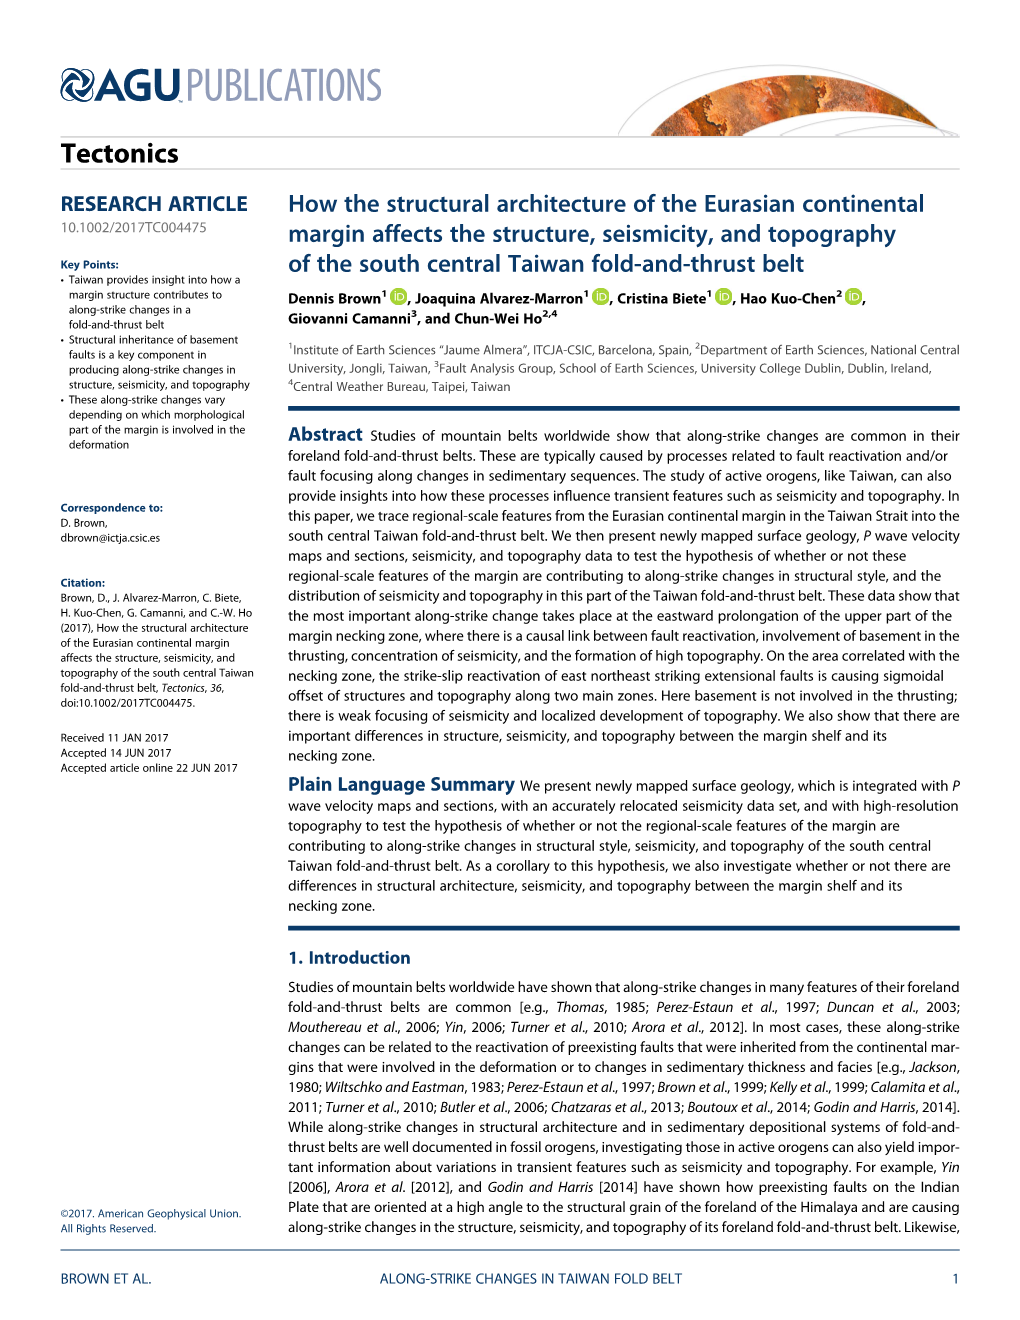 How the Structural Architecture of the Eurasian Continental Margin Affects